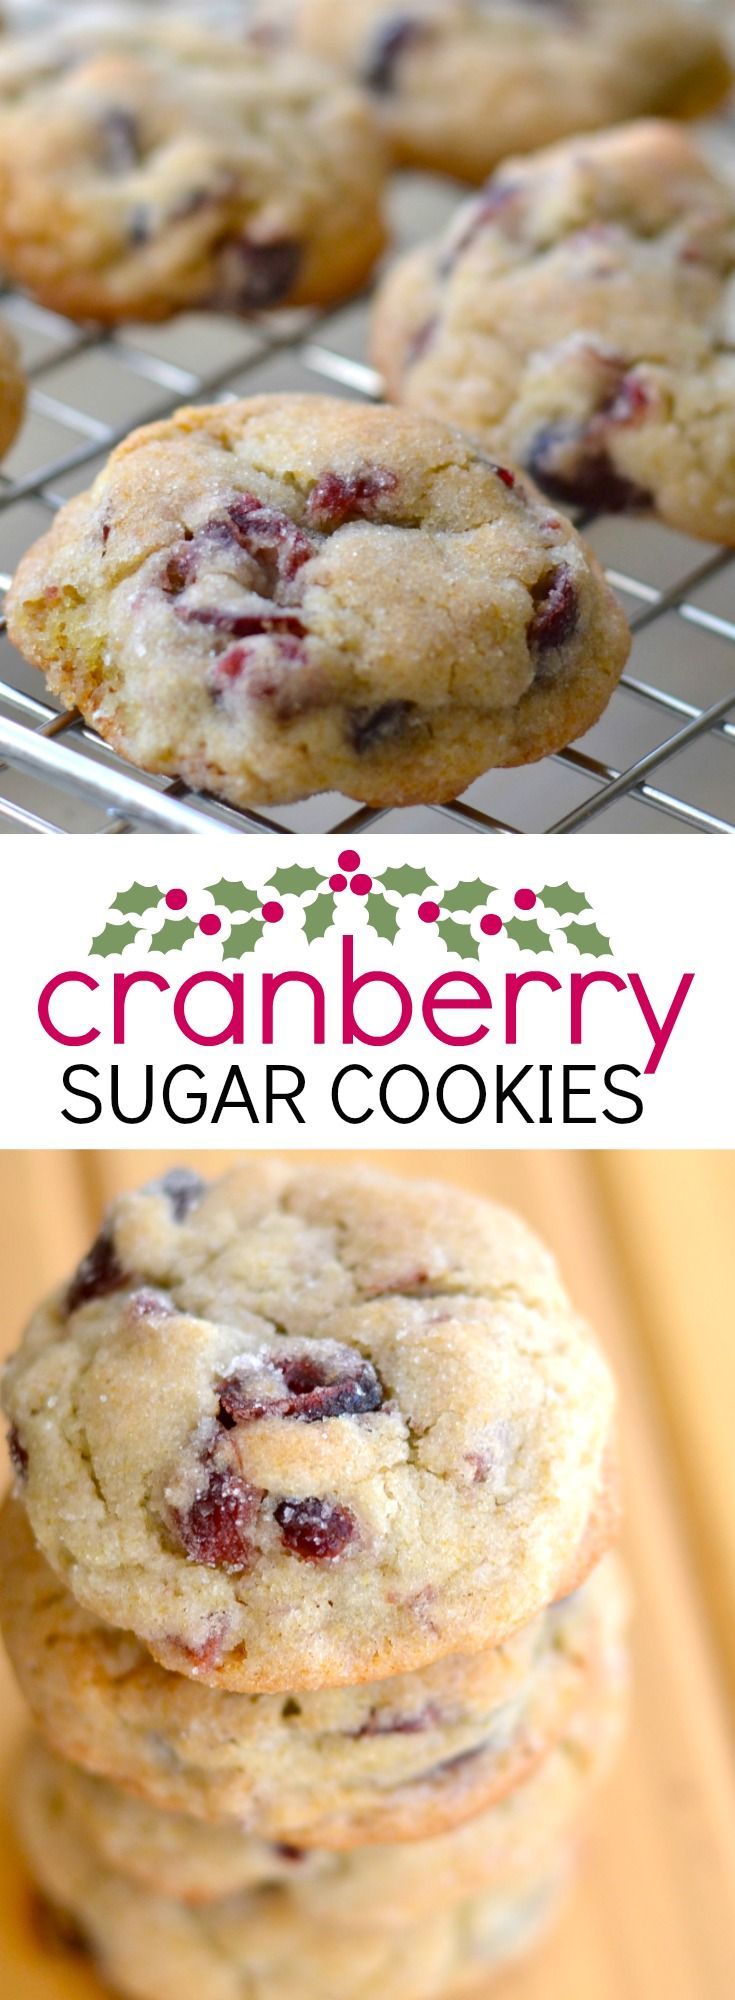 These soft cranberry sugar cookies are a delicious treat for Christmas or any time